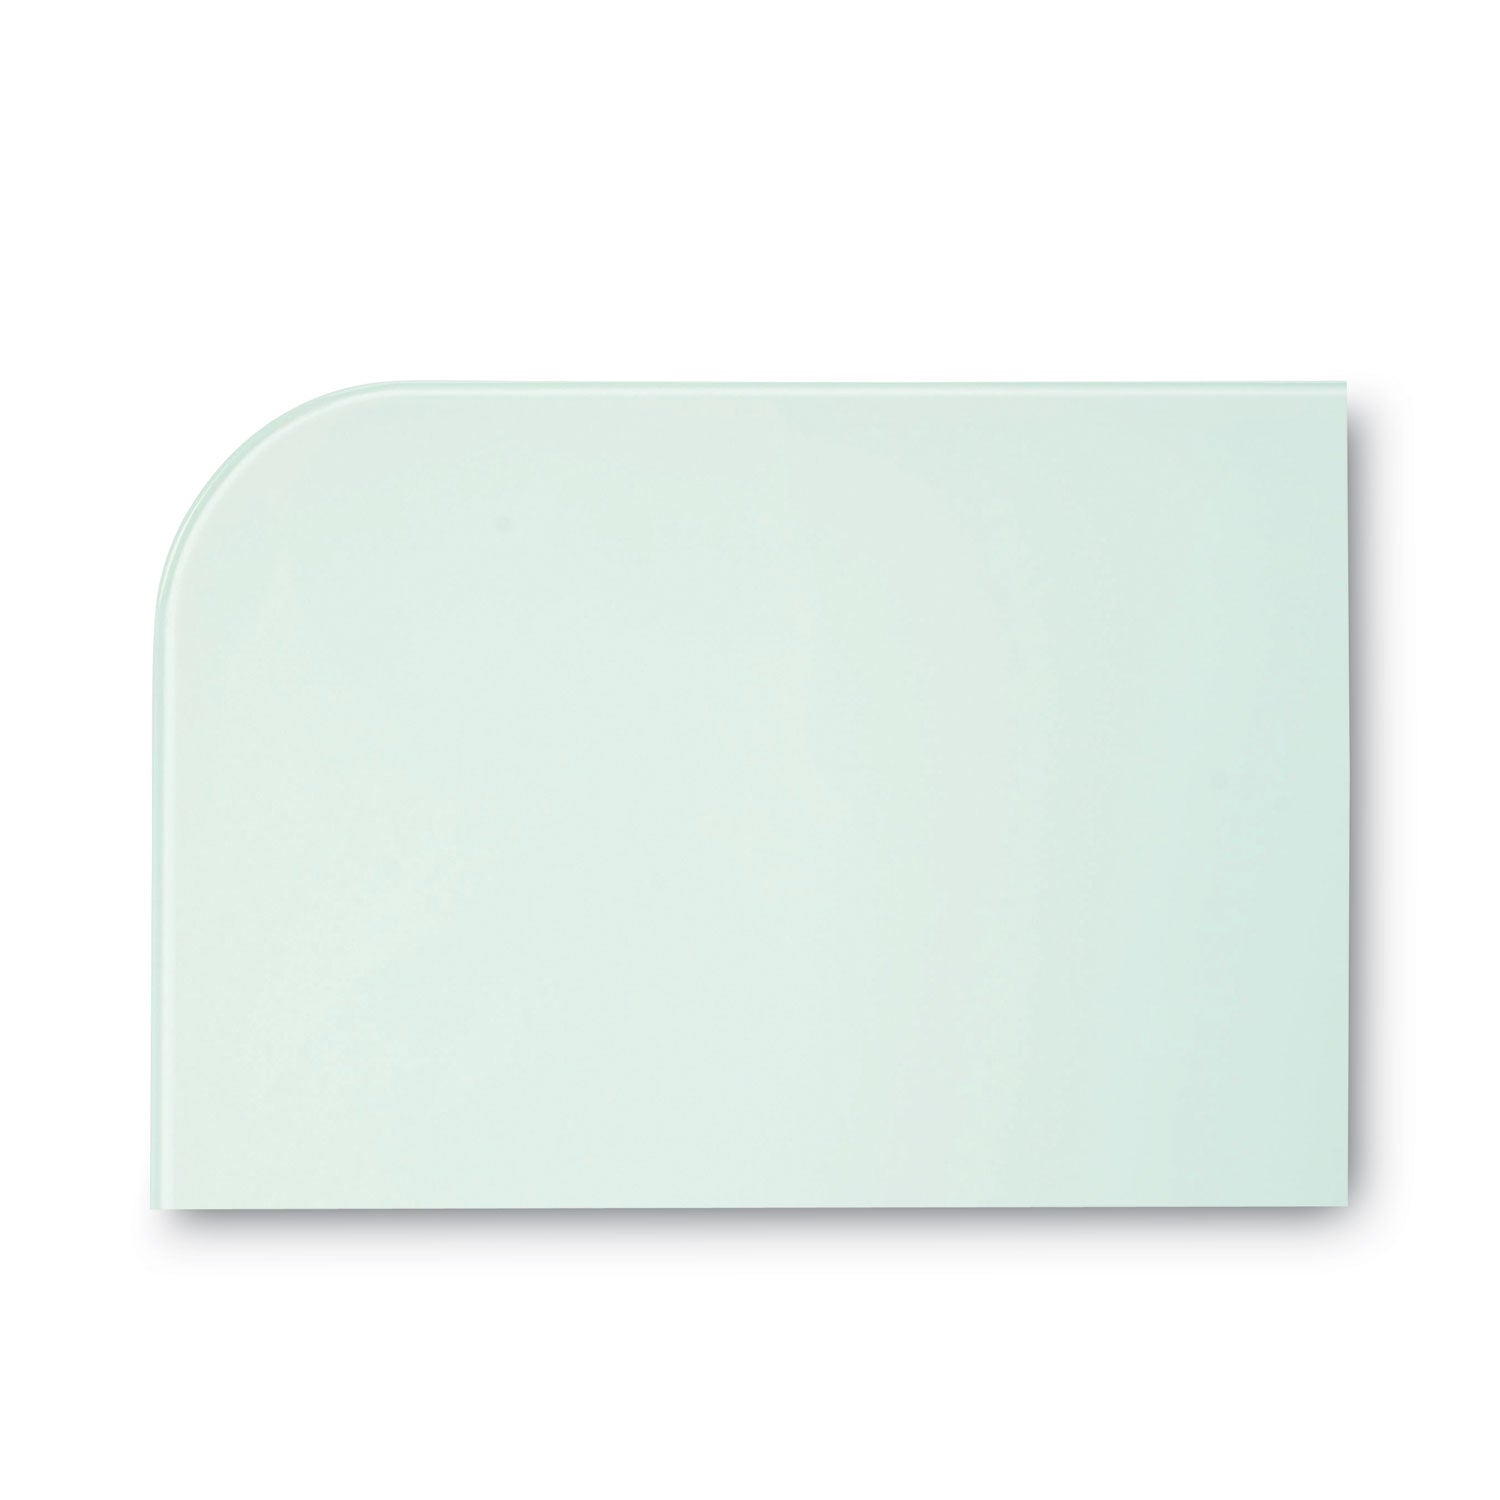 magnetic-glass-dry-erase-board-36-x-24-opaque-white-surface_bvcgl070101 - 8